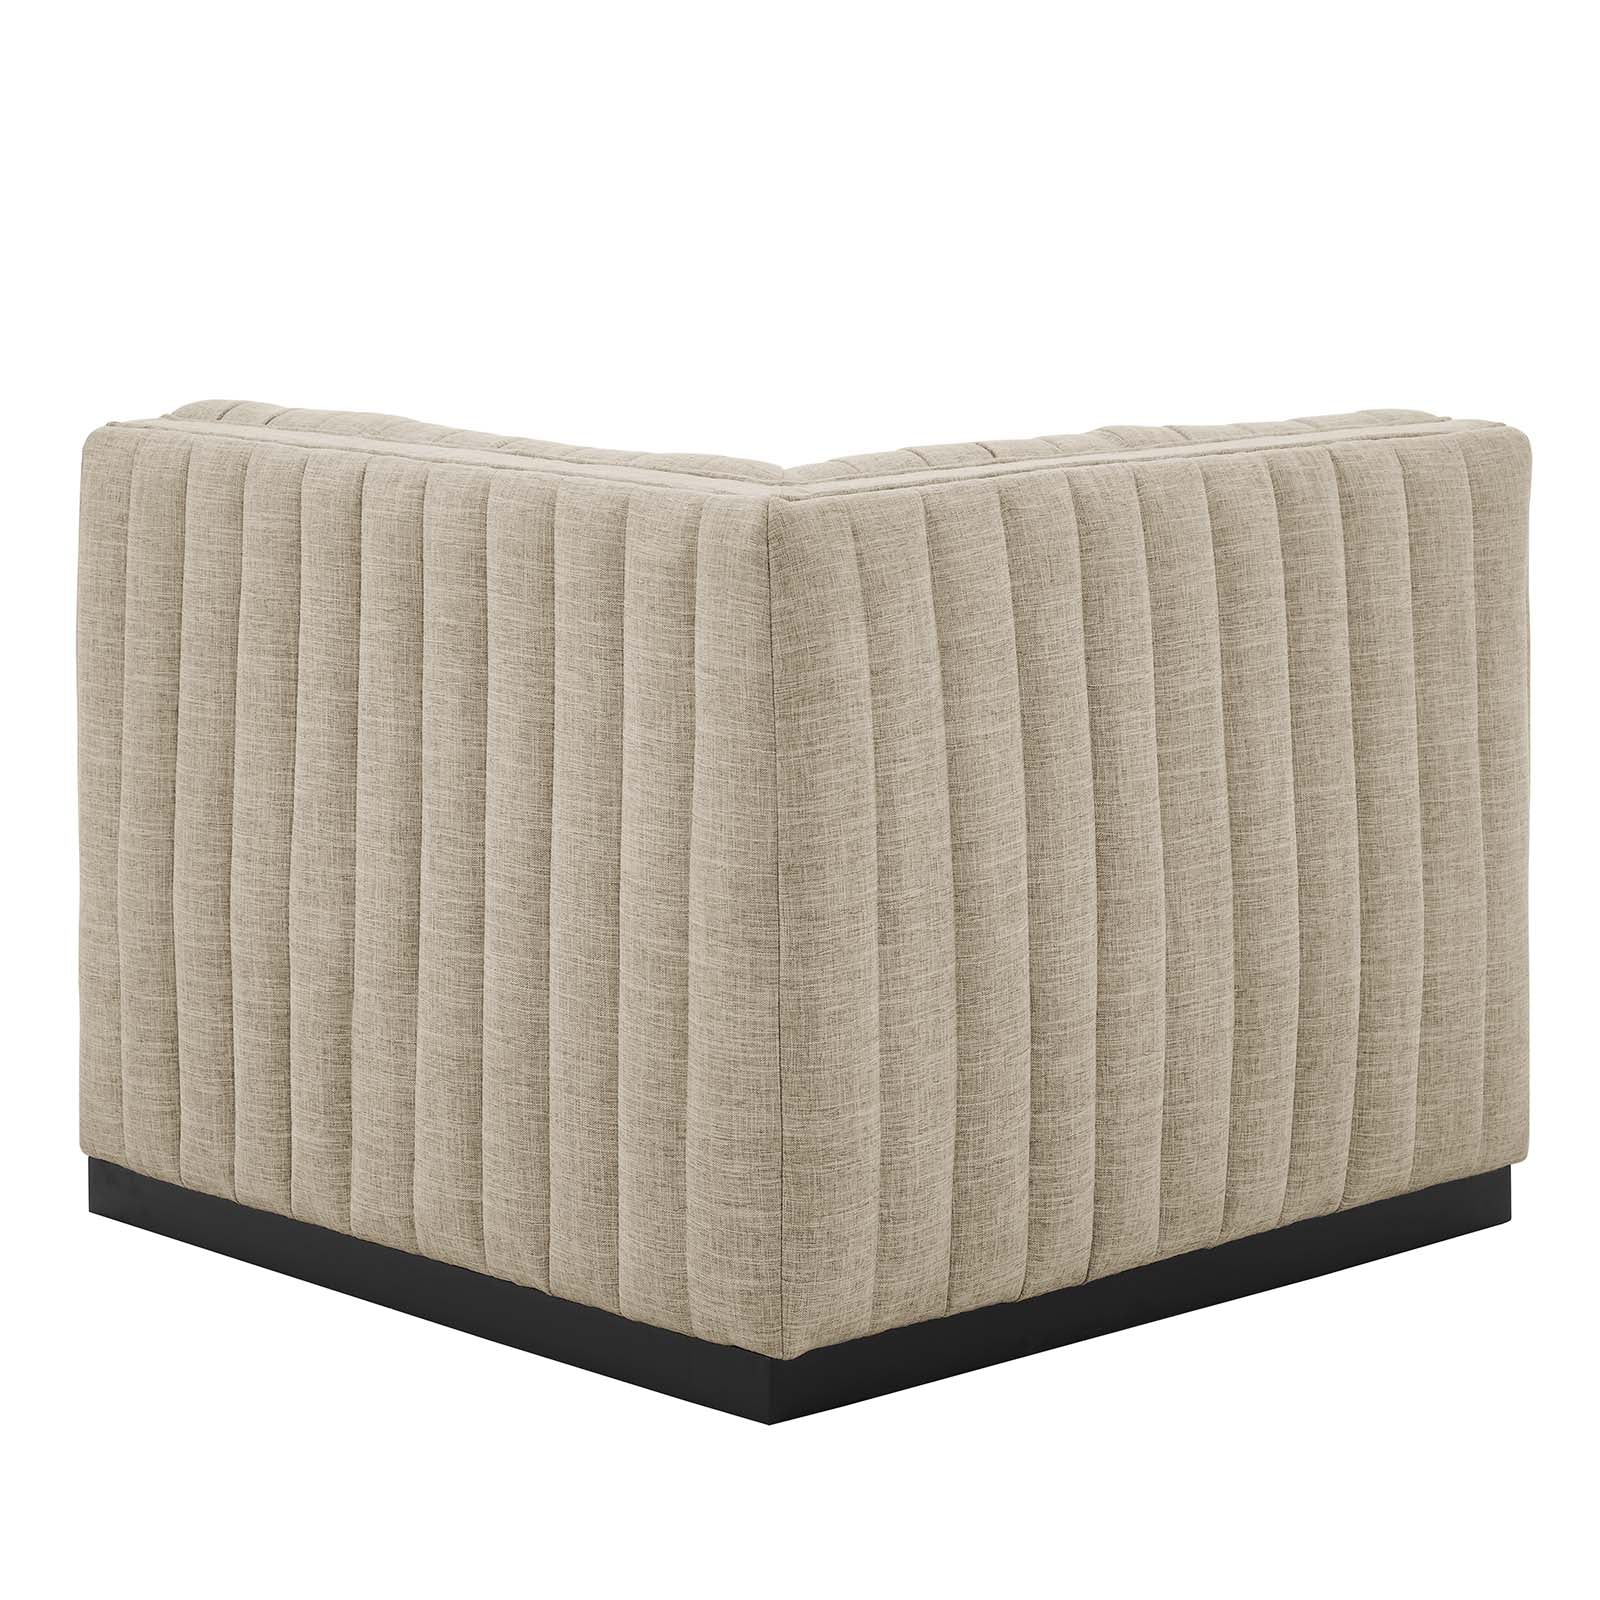 Conjure Channel Tufted Upholstered Fabric Left Corner Chair - East Shore Modern Home Furnishings